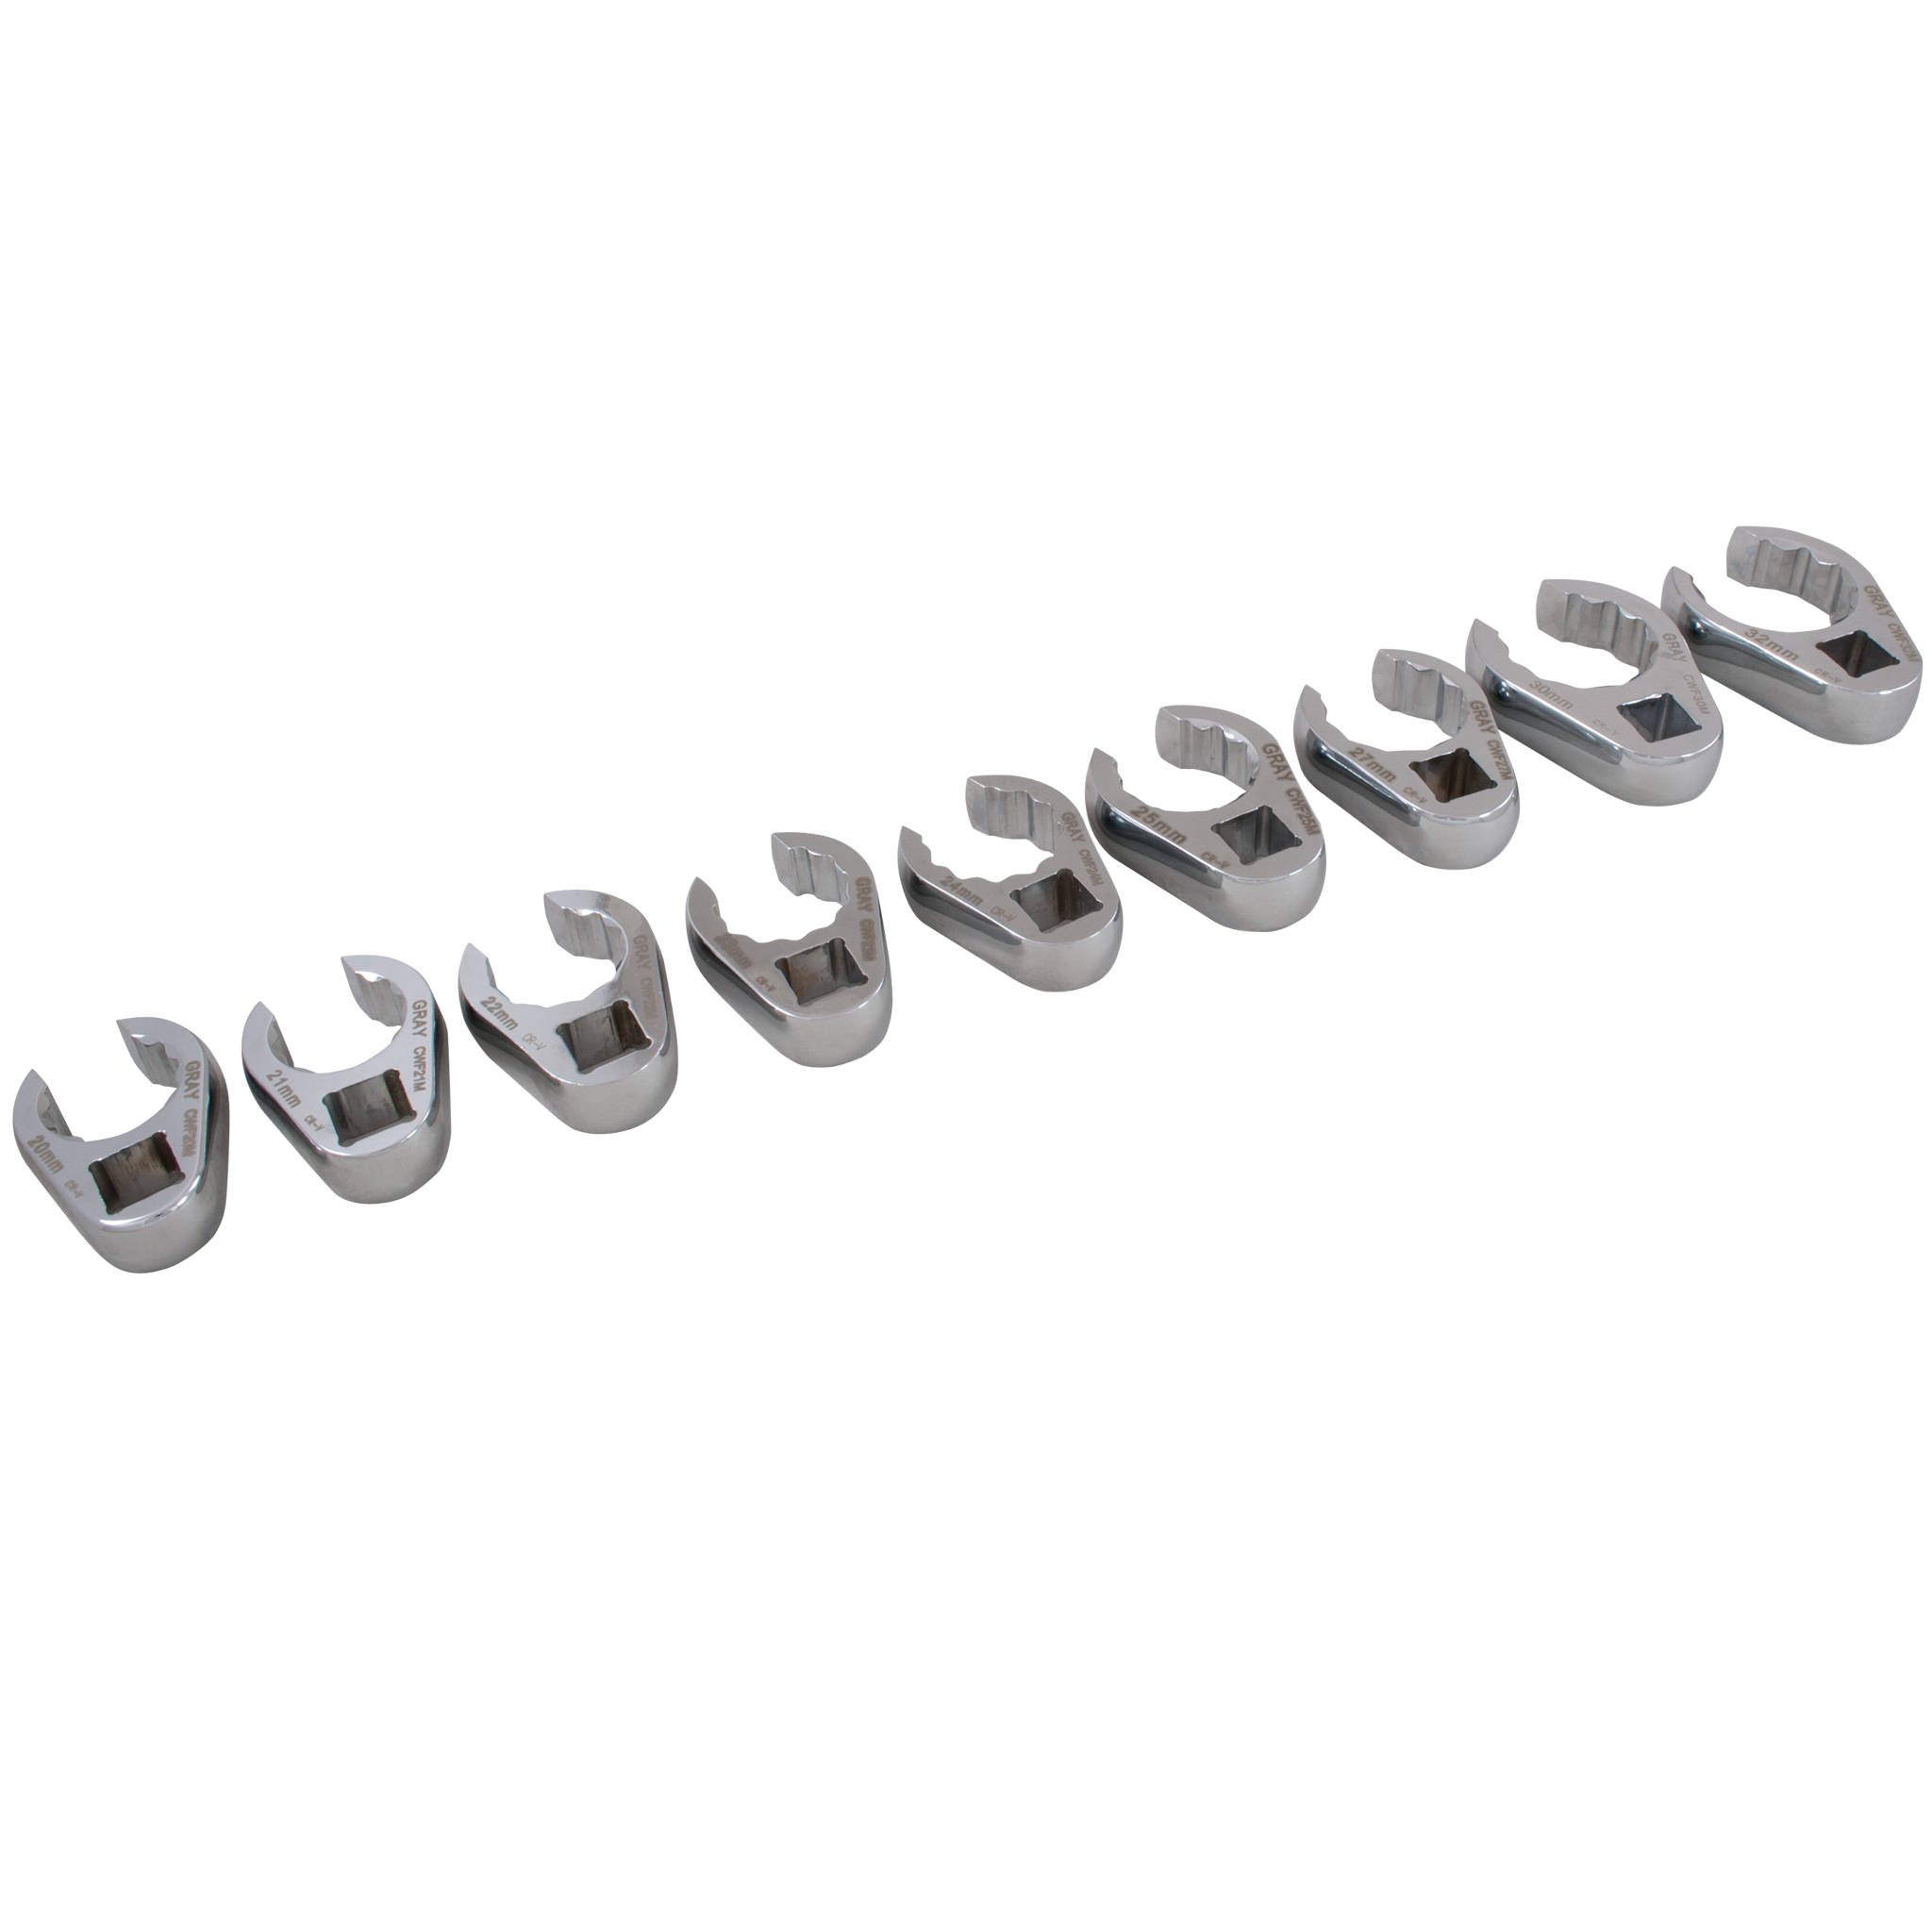 9 Piece 1/2" Drive Metric Mirror Chrome Flare Nut Crowfoot Wrench Set